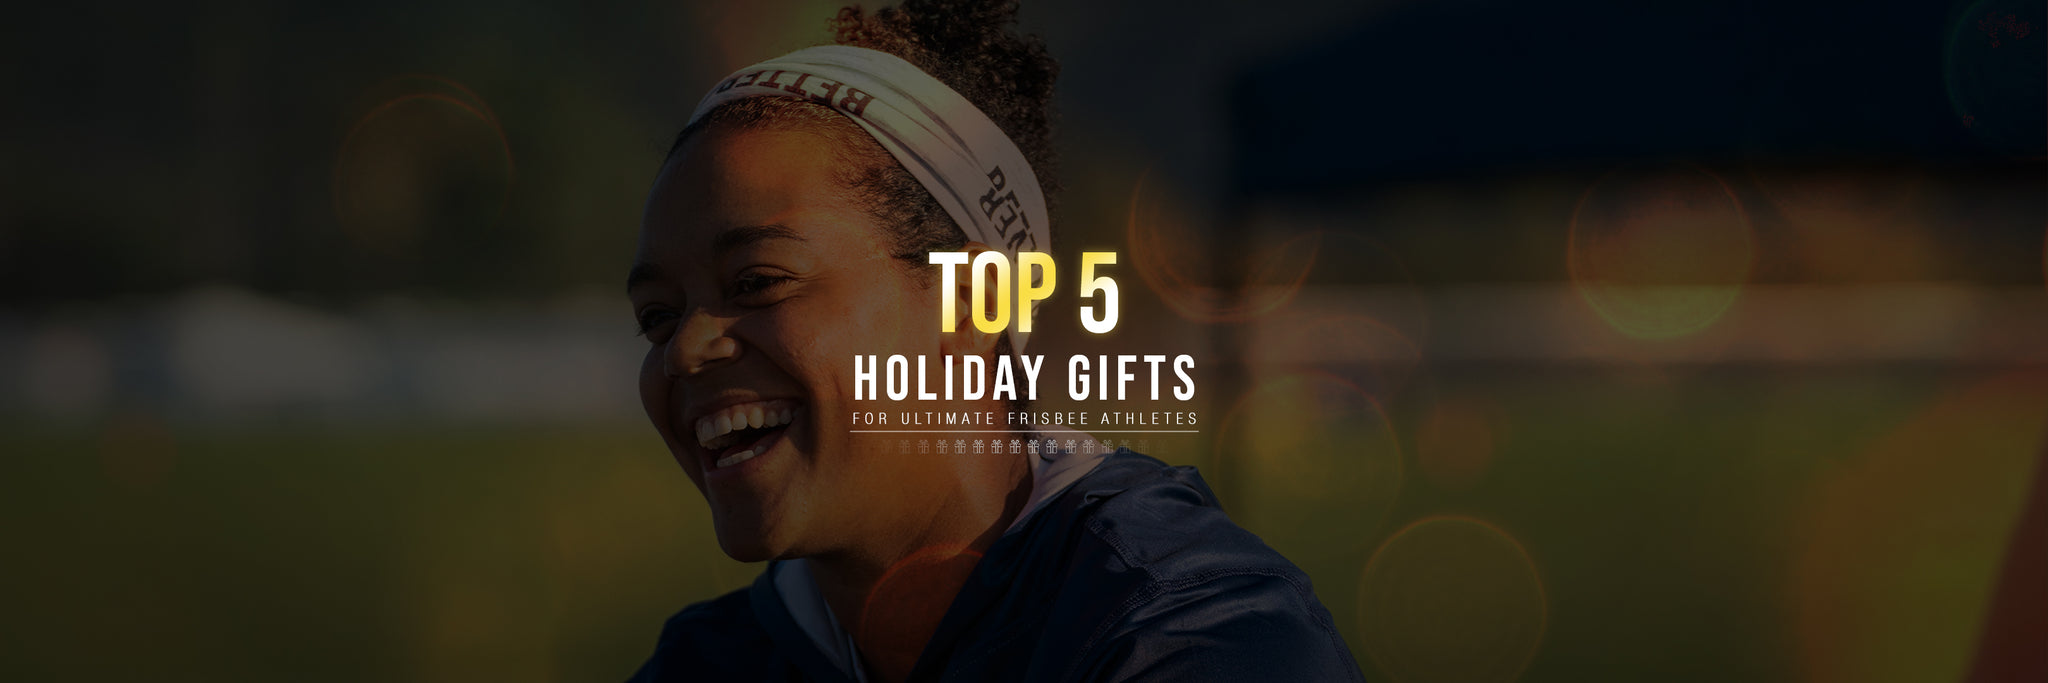 Top 5 Holiday Gifts for Ultimate Frisbee Athletes